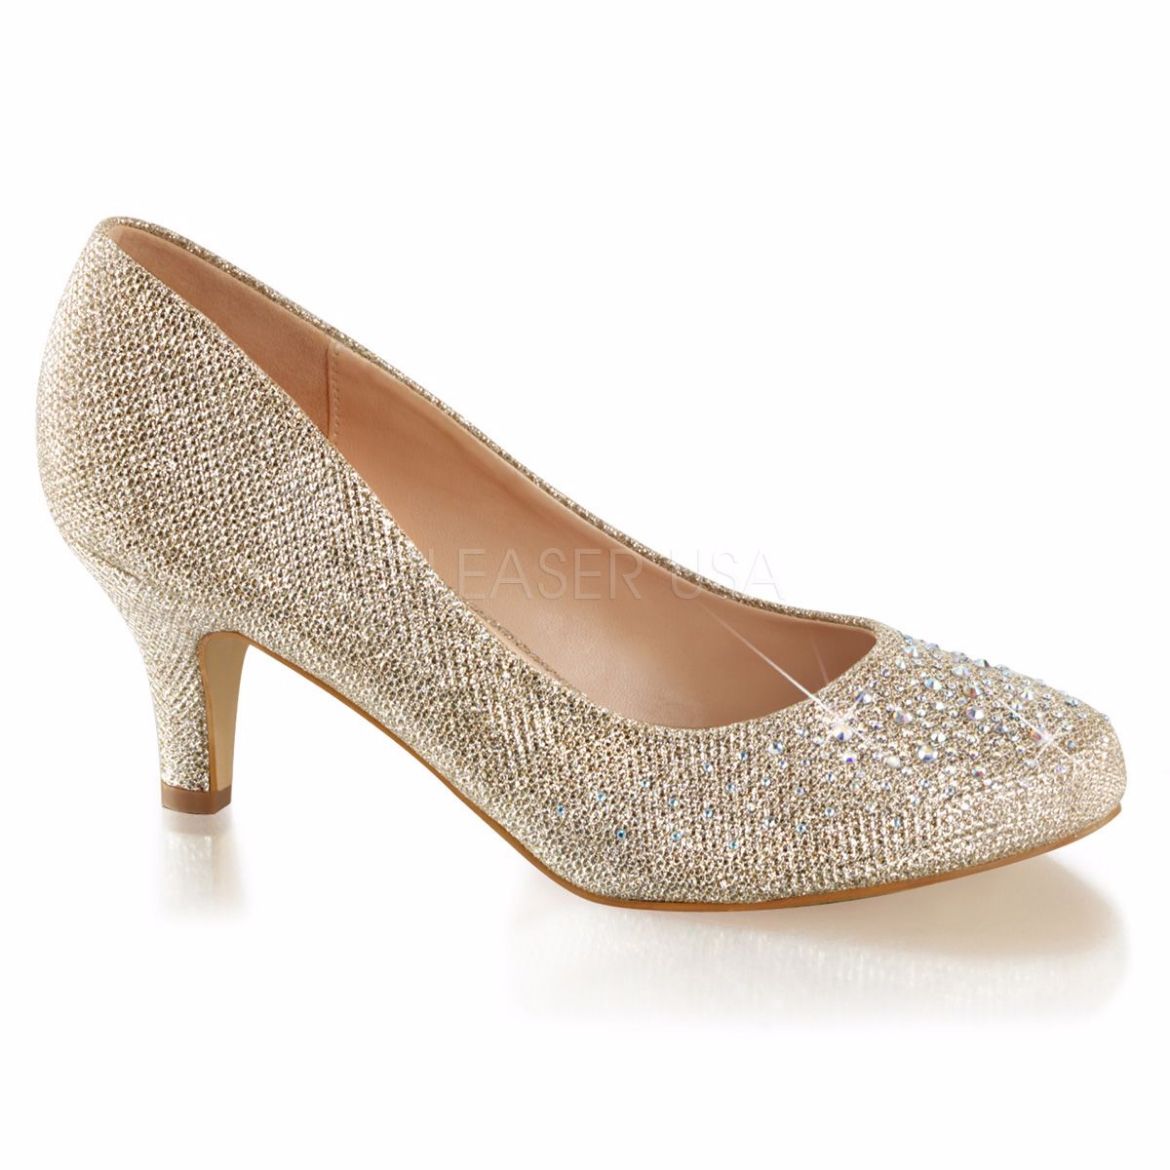 Product image of Fabulicious DORIS-06 Nude Glitter Mesh Fabric 2 1/2 inch (6.4 cm) Kitten Heel Pump Embellished With Rhinestones Glitter Court Pump Shoes